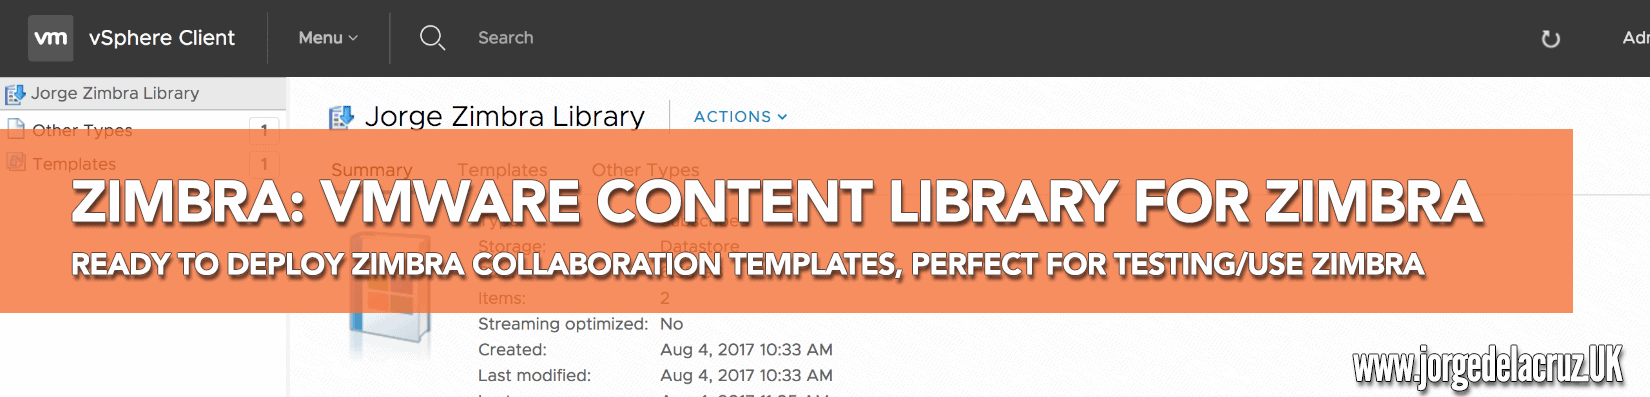 Zimbra: VMware Content Library with Zimbra Collaboration templates ready to  deploy - The Blog of Jorge de la Cruz